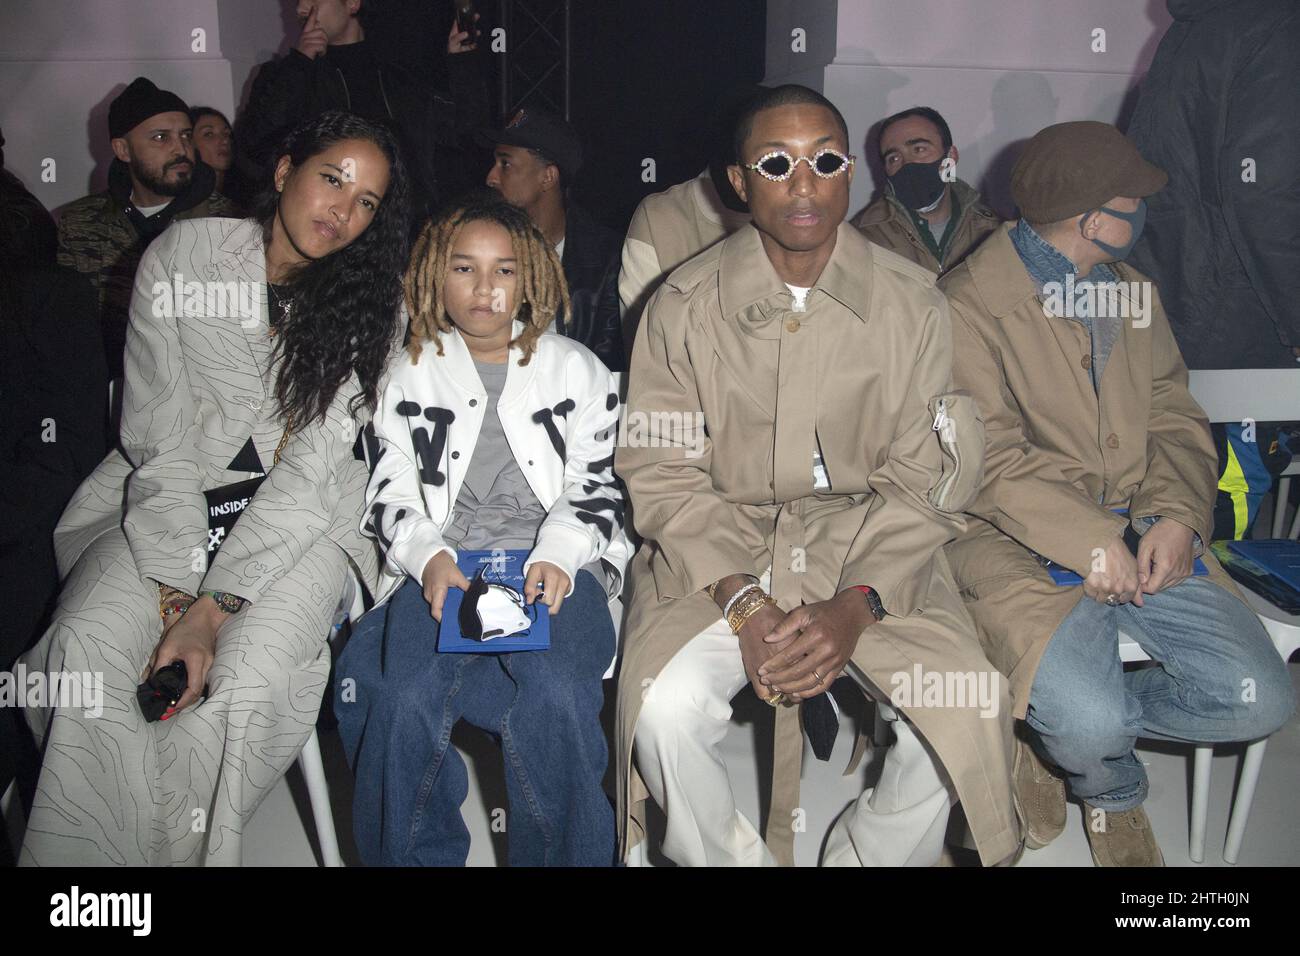 Pharrell Williams honored with a star on the Hollywood Walk of Fame  Featuring: Pharrell Williams,Helen Lasichanh,Rocket Ayer Williams,Family  Where: Hollywood, California, United States When: 04 Dec 2014 Credit:  FayesVision/WENN.com Stock Photo 